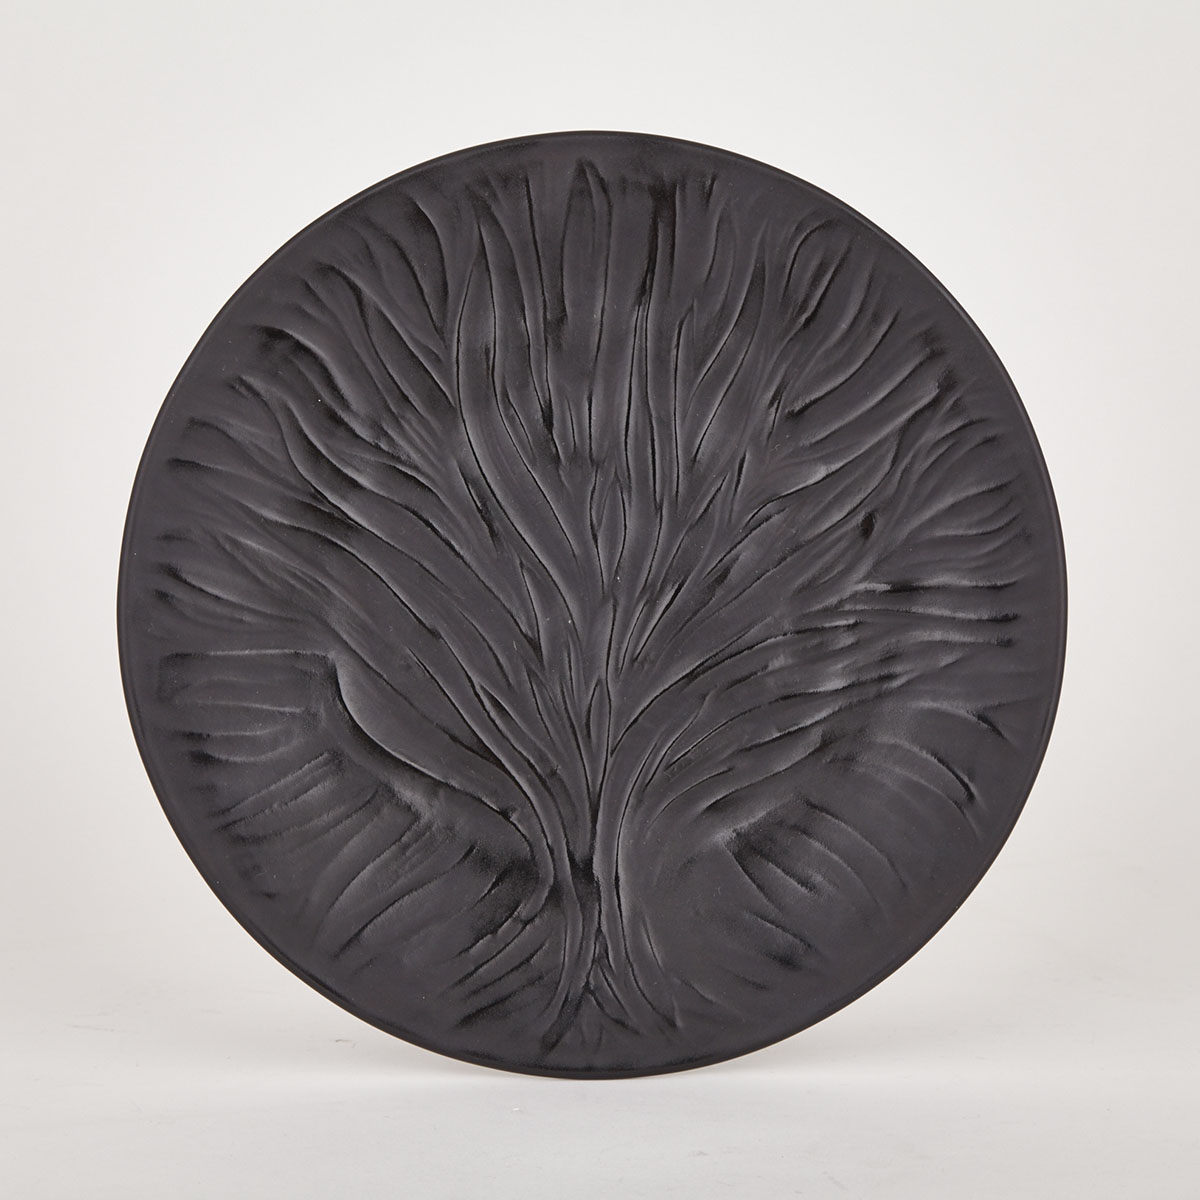 ‘Algues’, Lalique Moulded and Frosted Black Glass Plate, post-1978